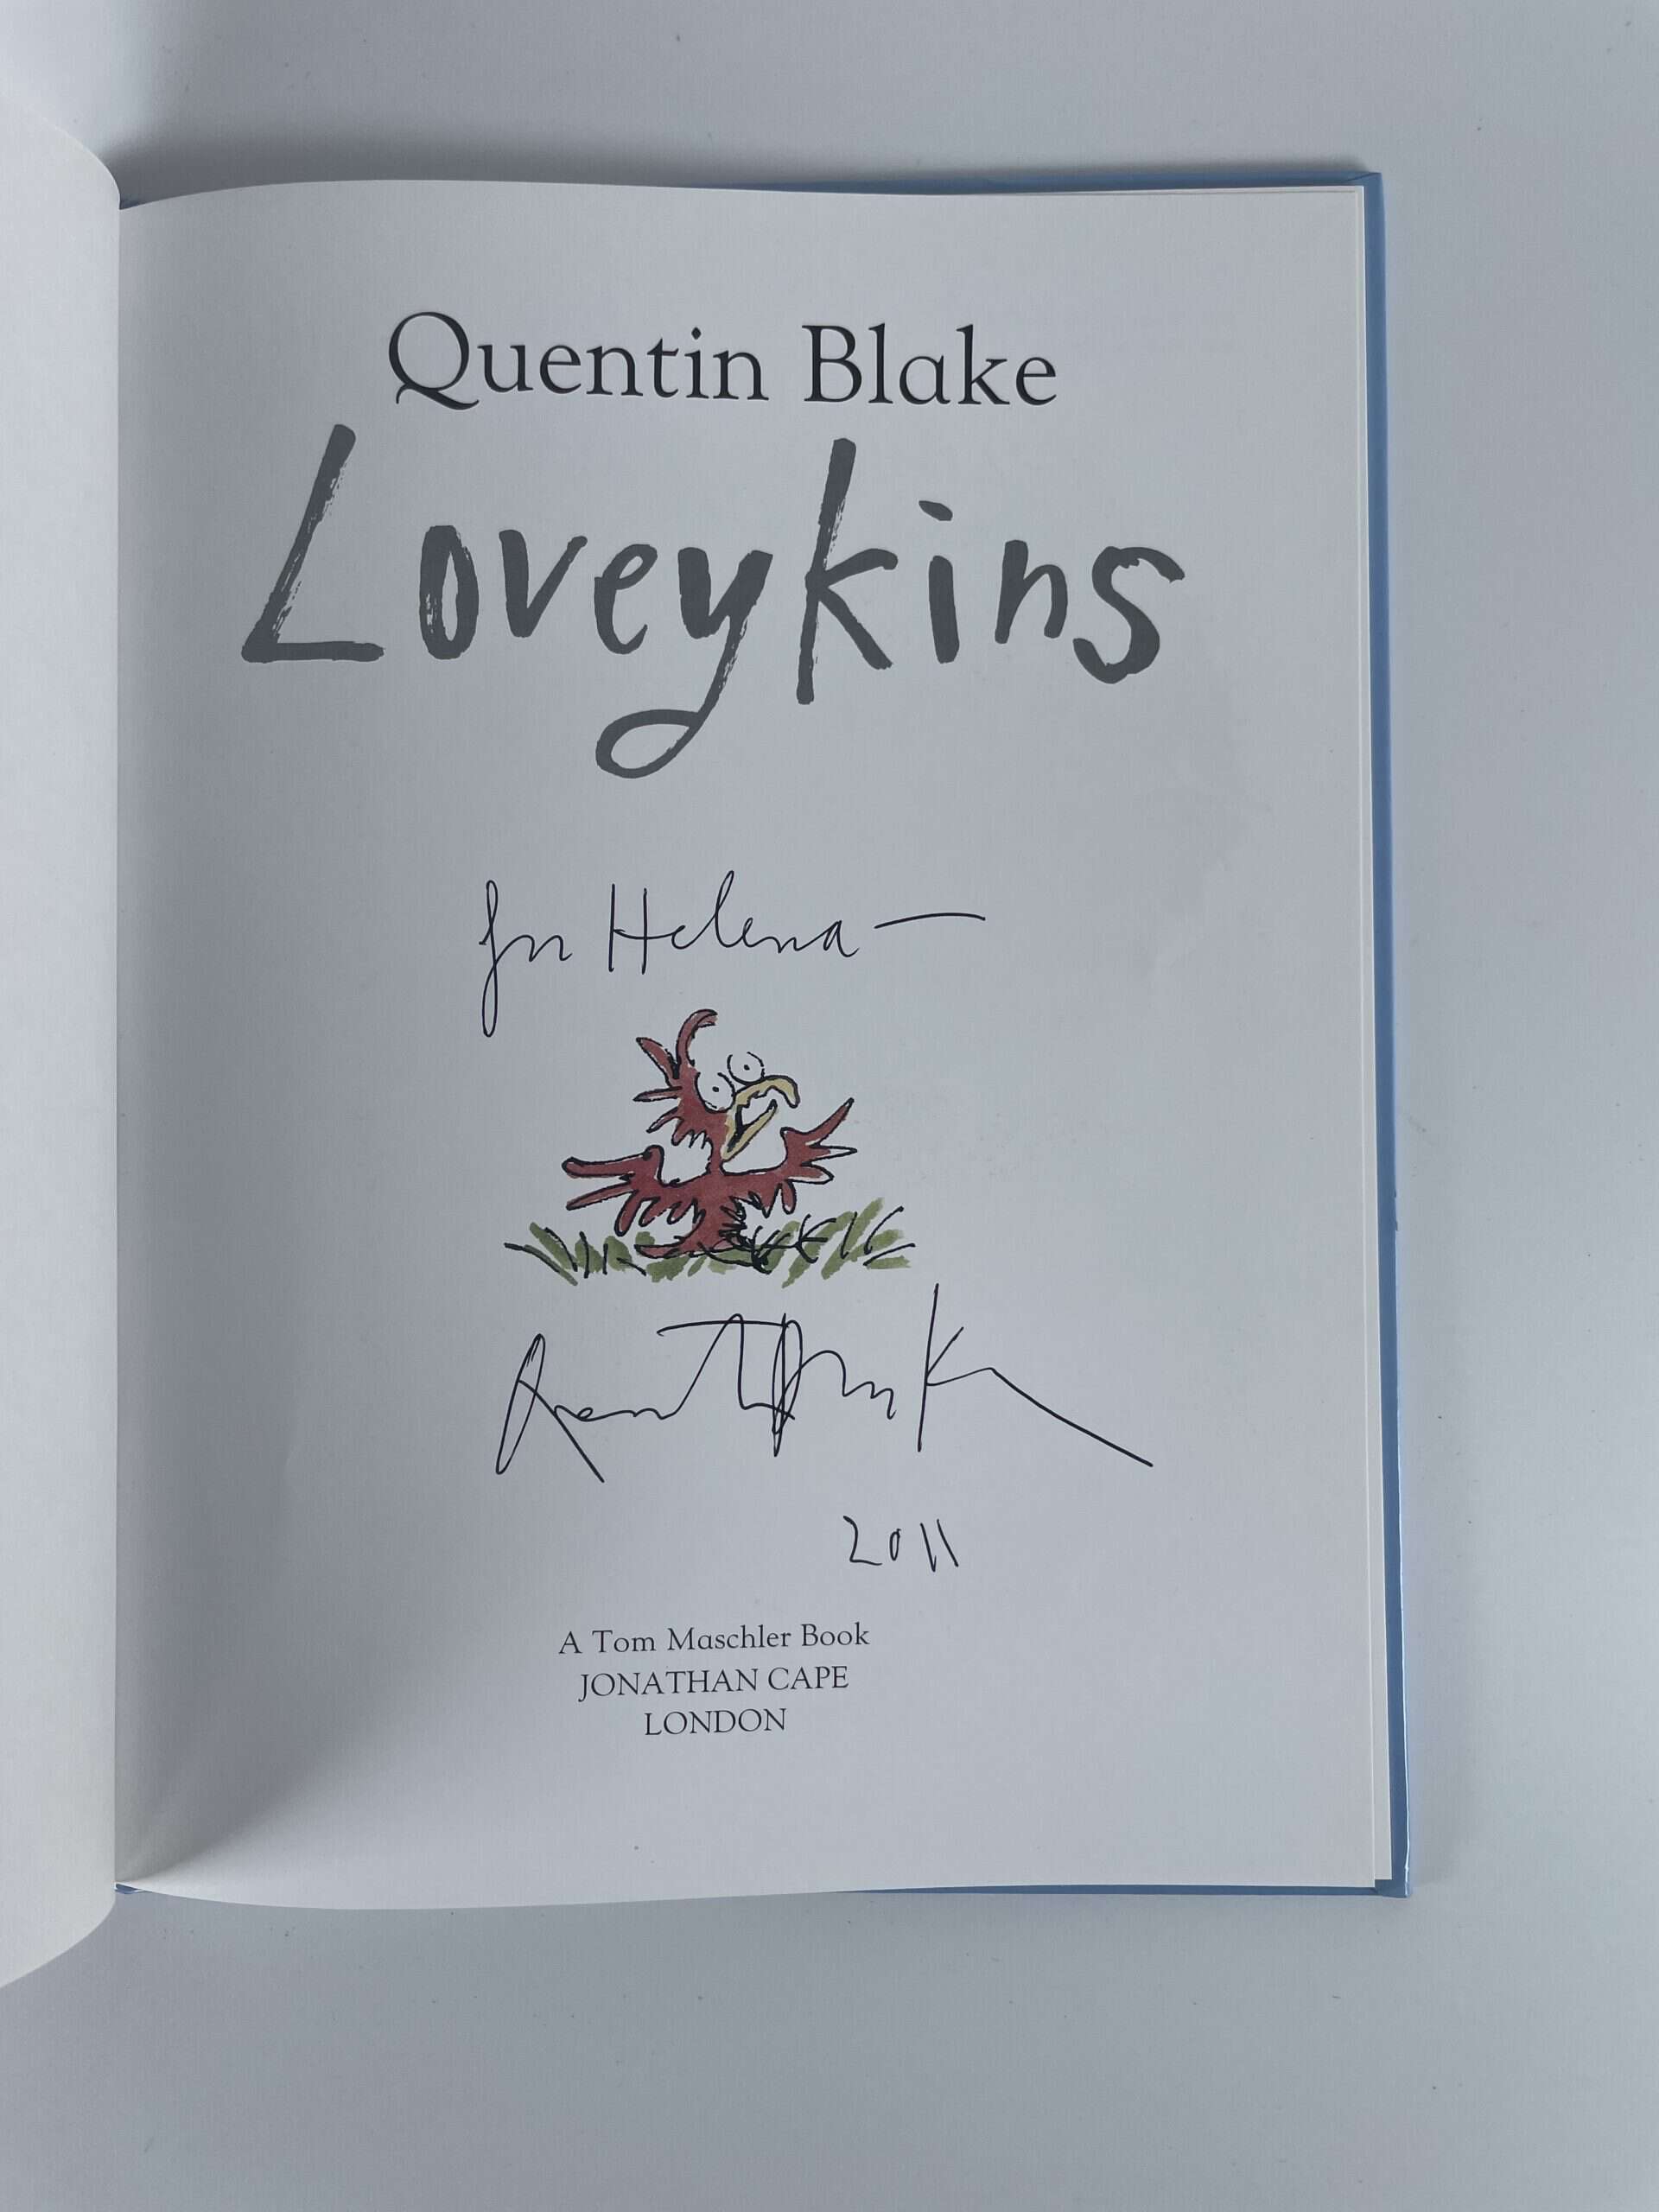 quentin blake loveykins signed first2